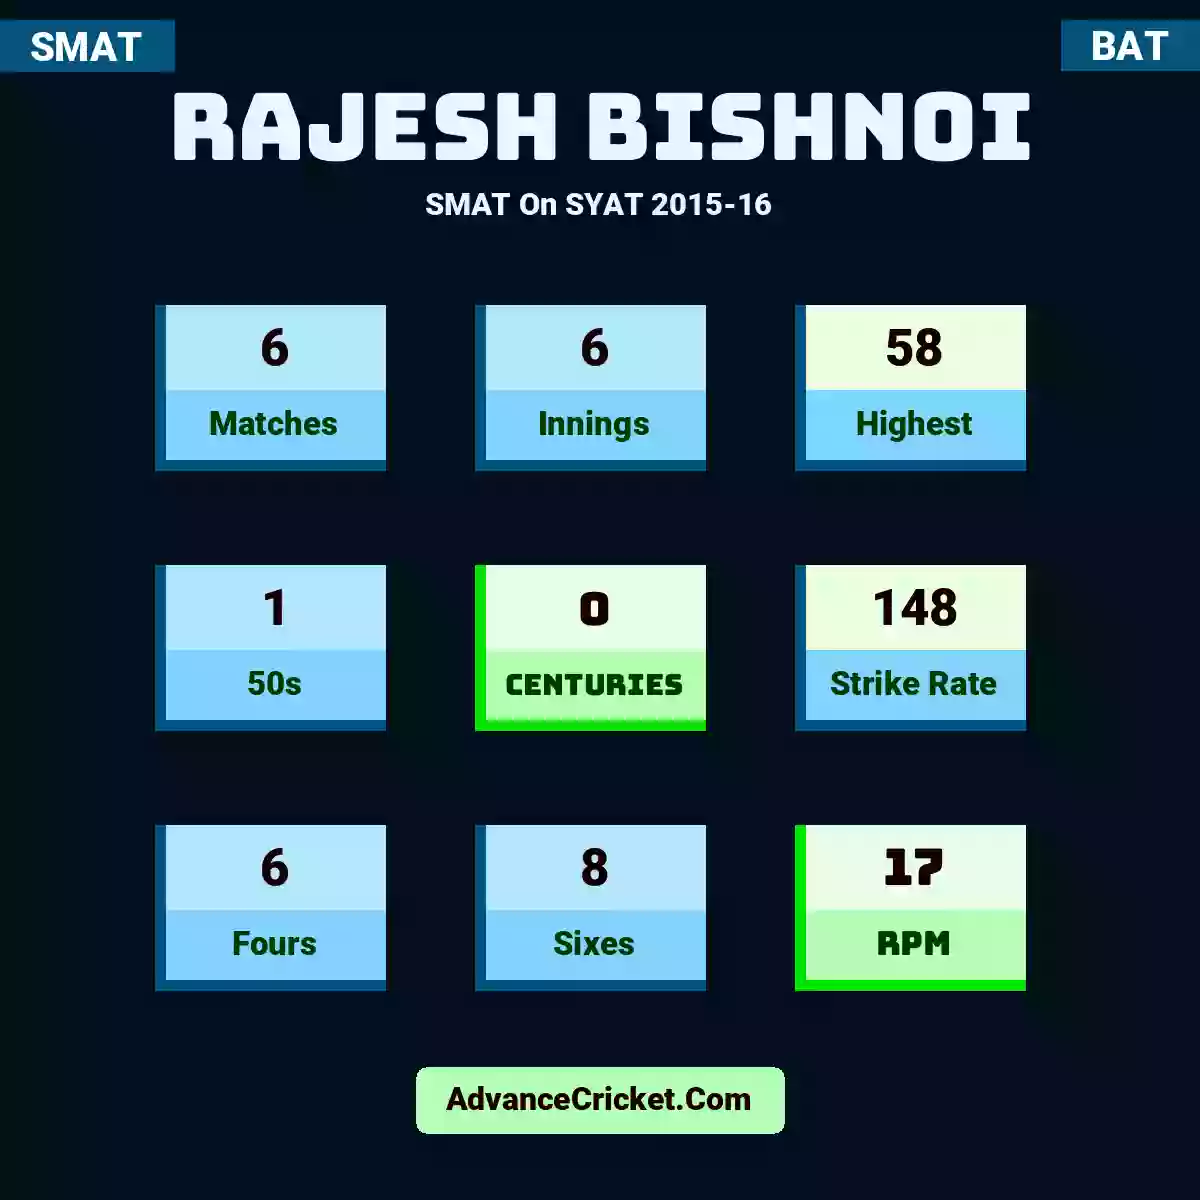 Rajesh Bishnoi SMAT  On SYAT 2015-16, Rajesh Bishnoi played 6 matches, scored 58 runs as highest, 1 half-centuries, and 0 centuries, with a strike rate of 148. R.Bishnoi hit 6 fours and 8 sixes, with an RPM of 17.